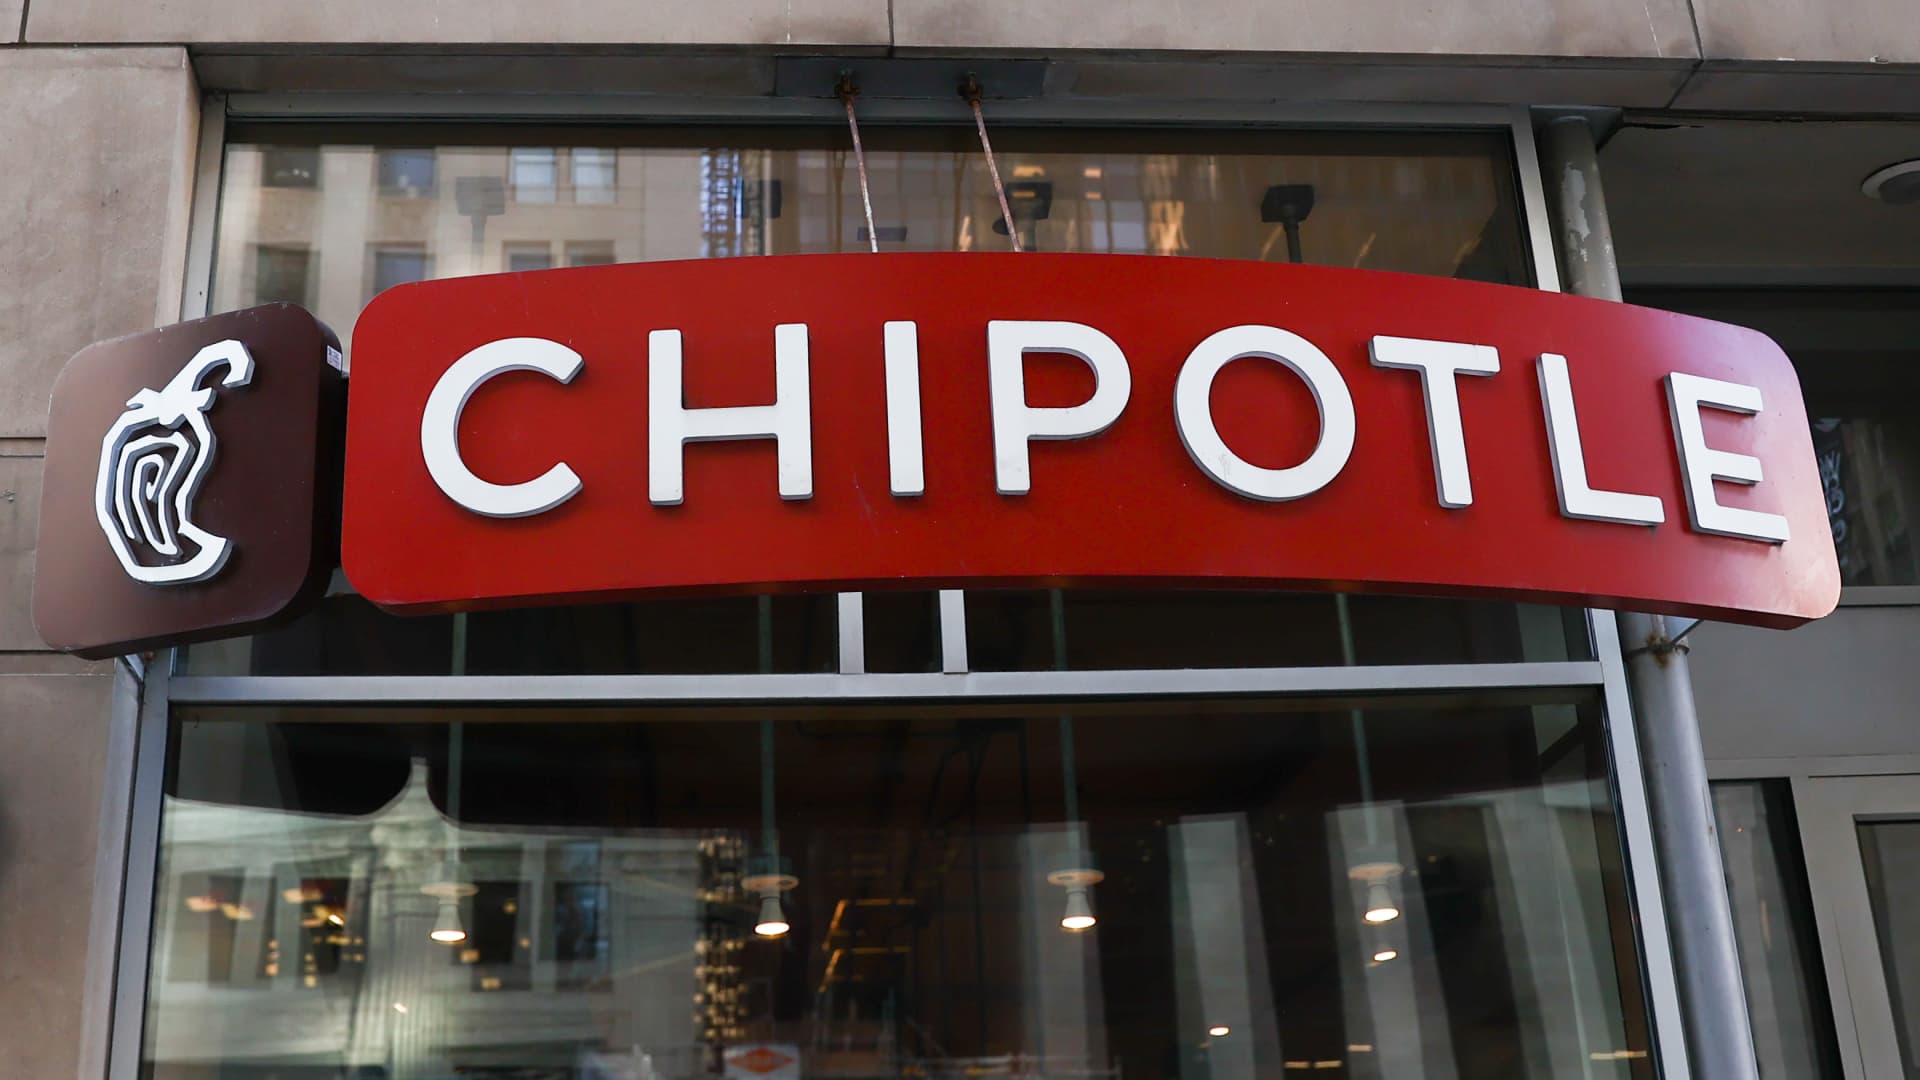 Chipotle Middle East locations coming next year via Alshaya Group deal